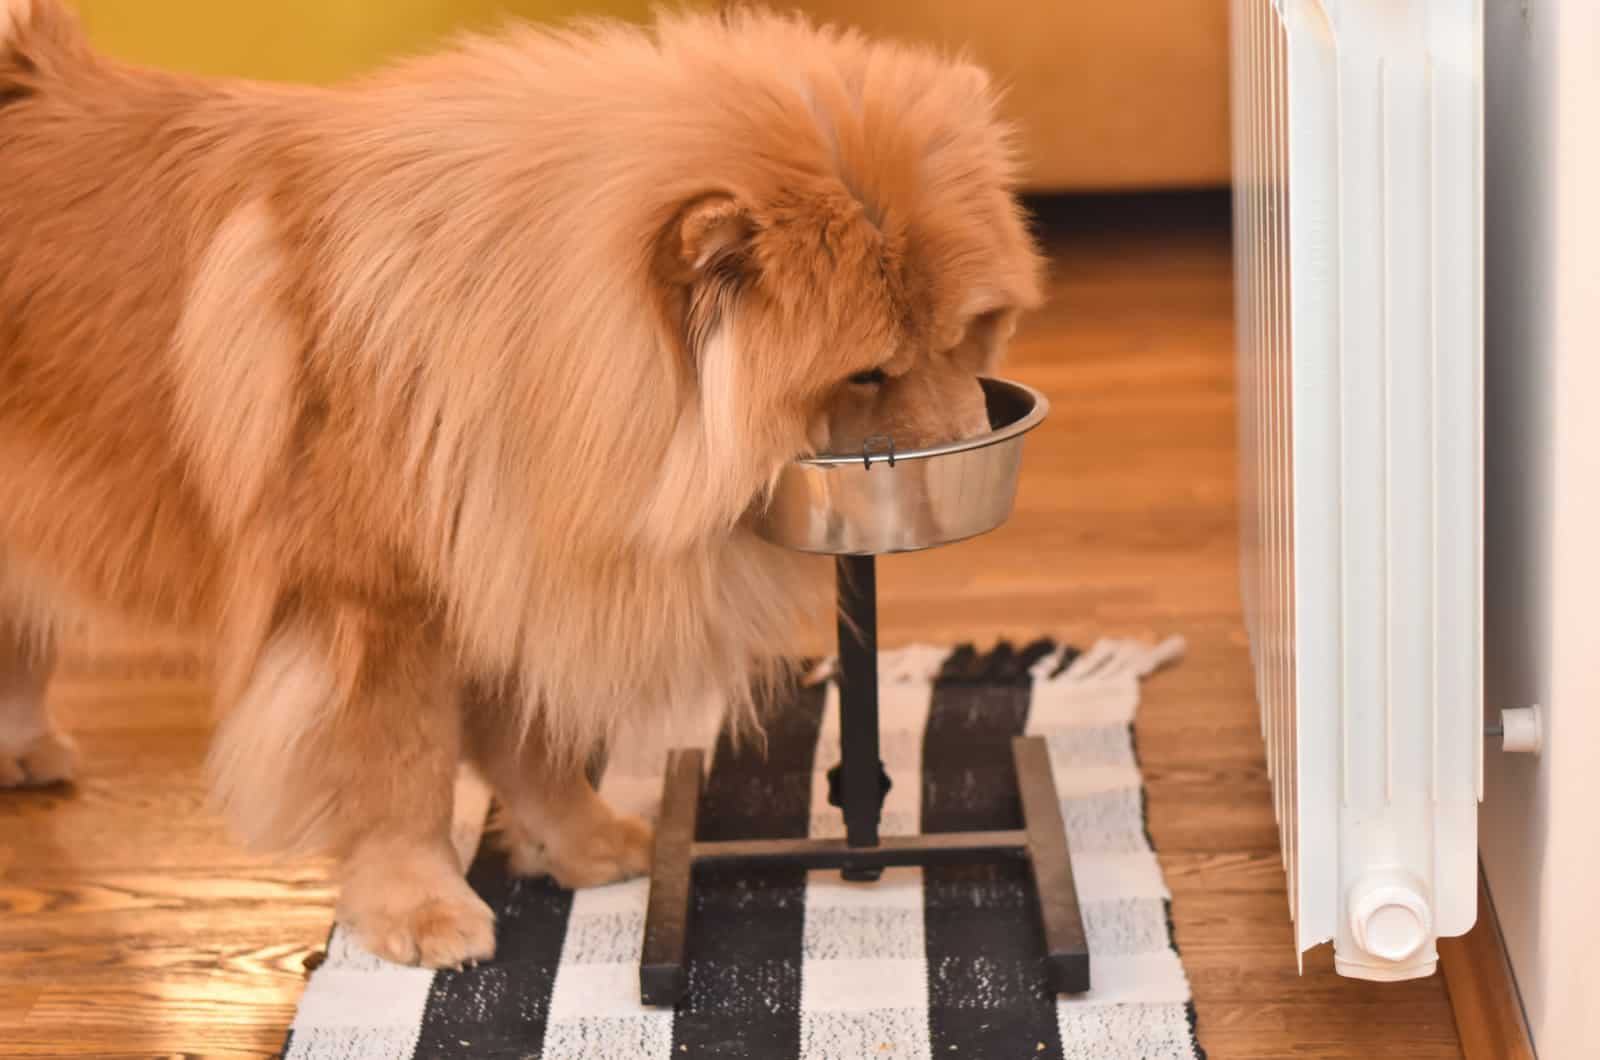 chow chow eating from a bowl